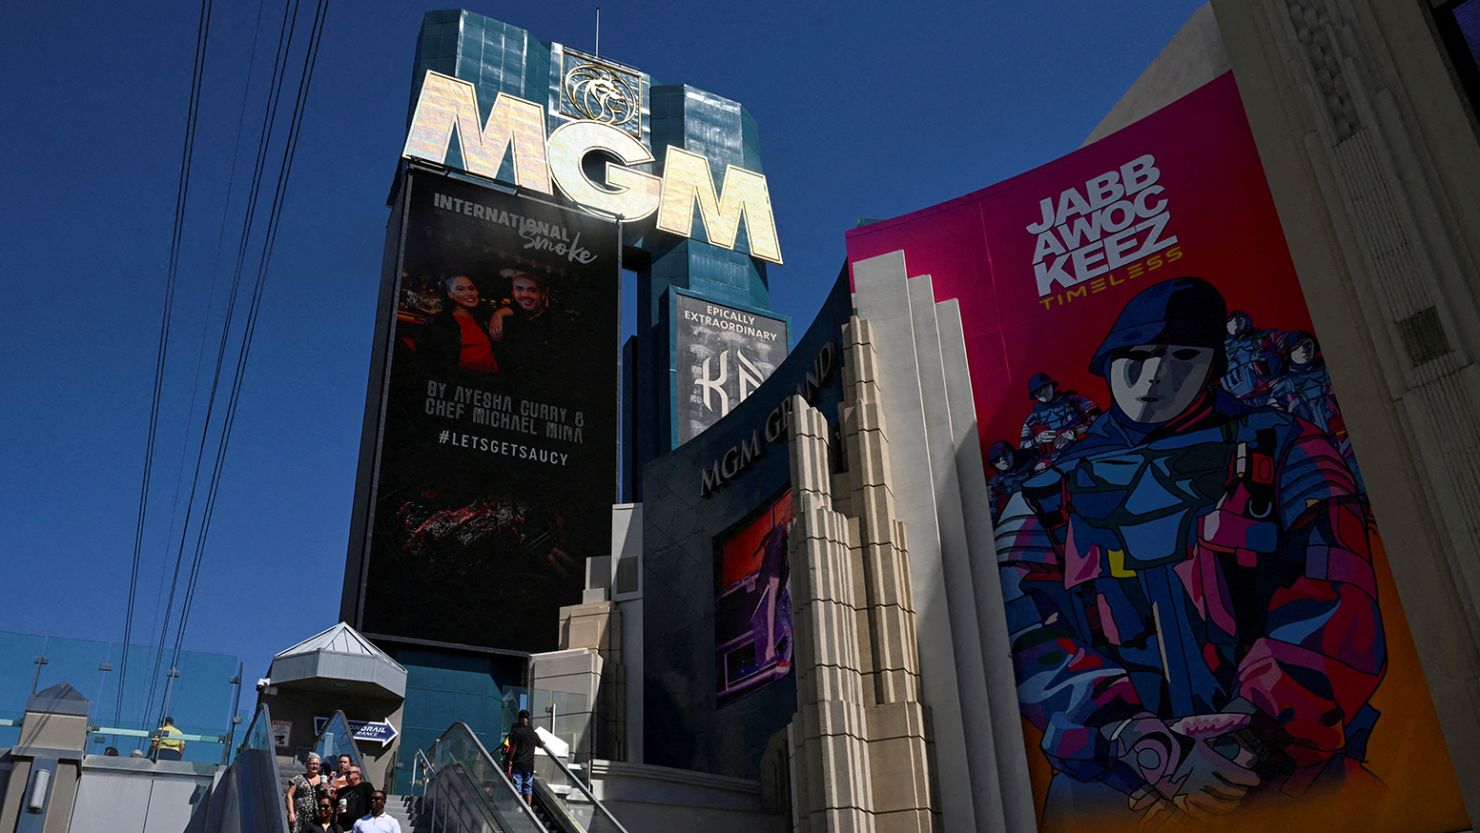 Casino giant MGM expects $100 mln hit from hack that led to data